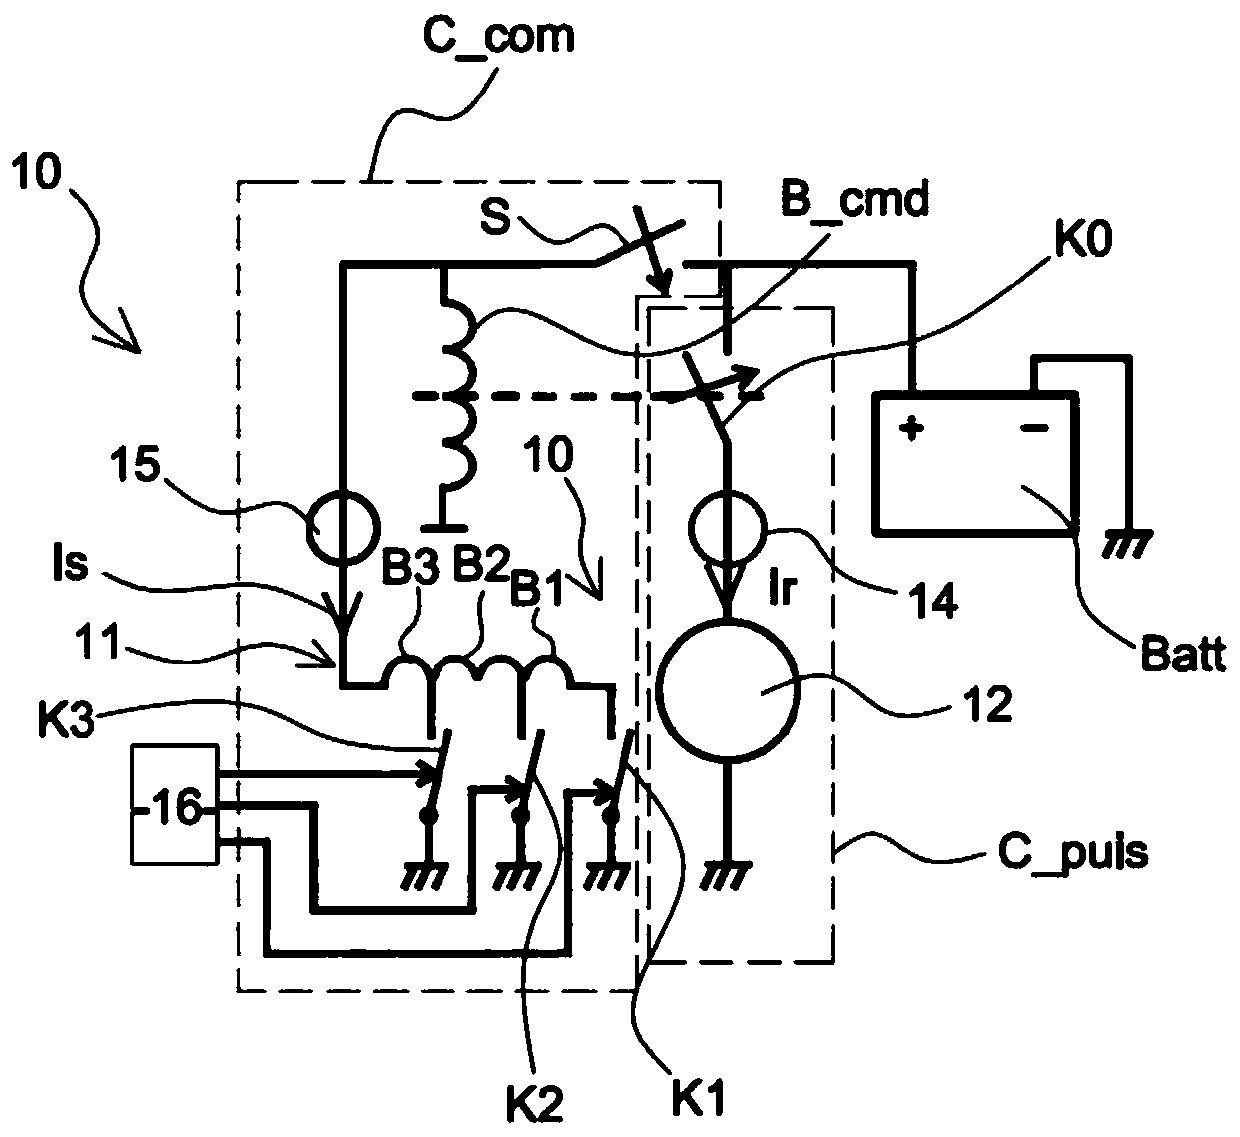 Flux switching rotating electrical machine for traction for motor vehicle